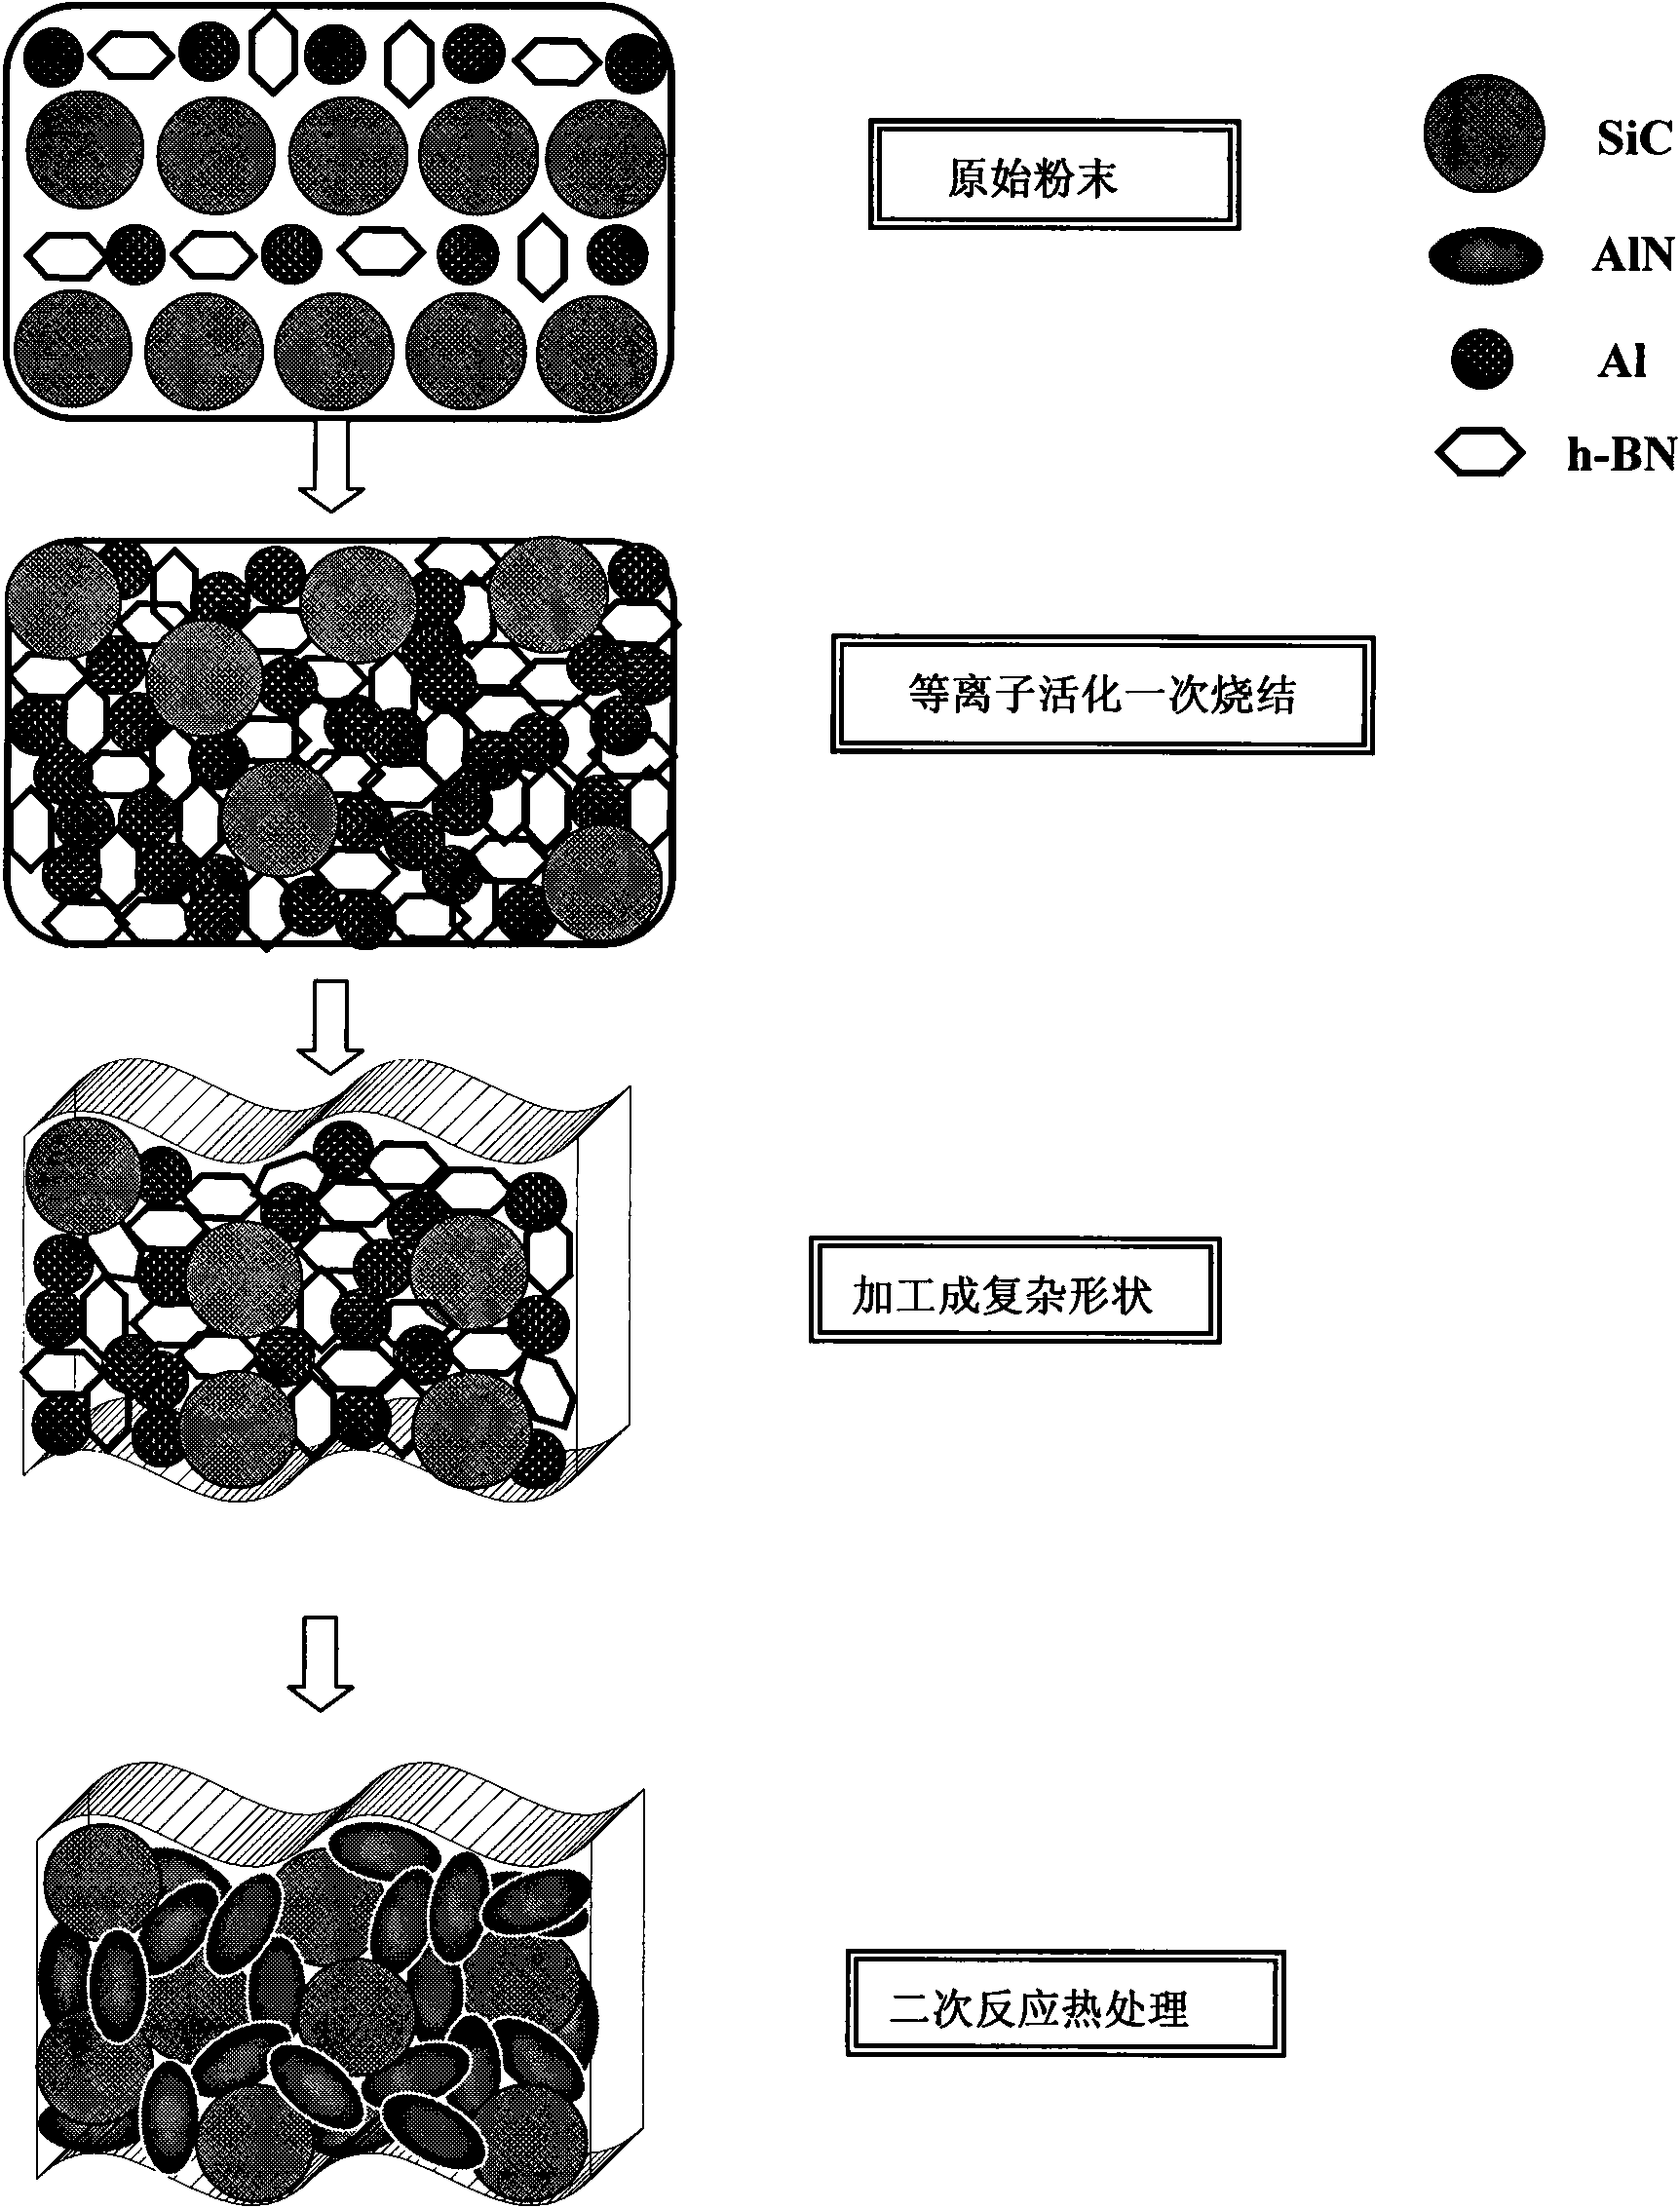 Method for preparing processable BN complex phase ceramic capable of improving later-stage hardness